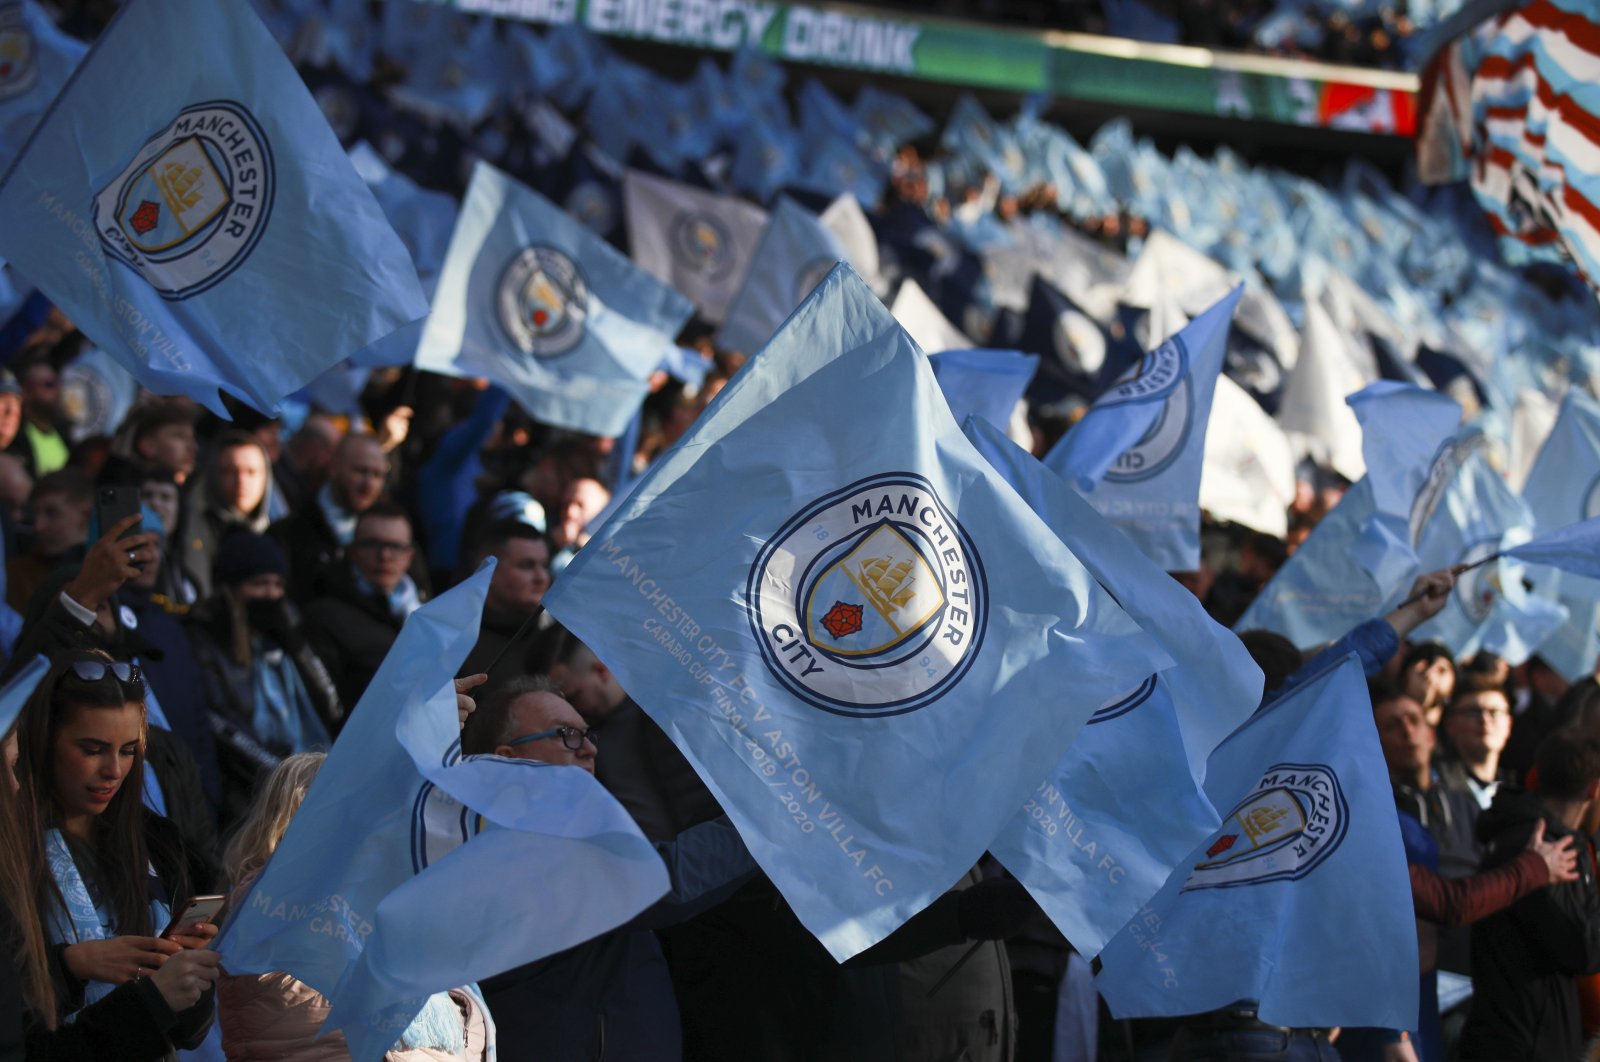 Manchester City fans wave the team's flag prior to the League Cup final against Aston Villa, at Wembley Stadium, London, England, Sunday, March 1, 2020. (AP Photo)